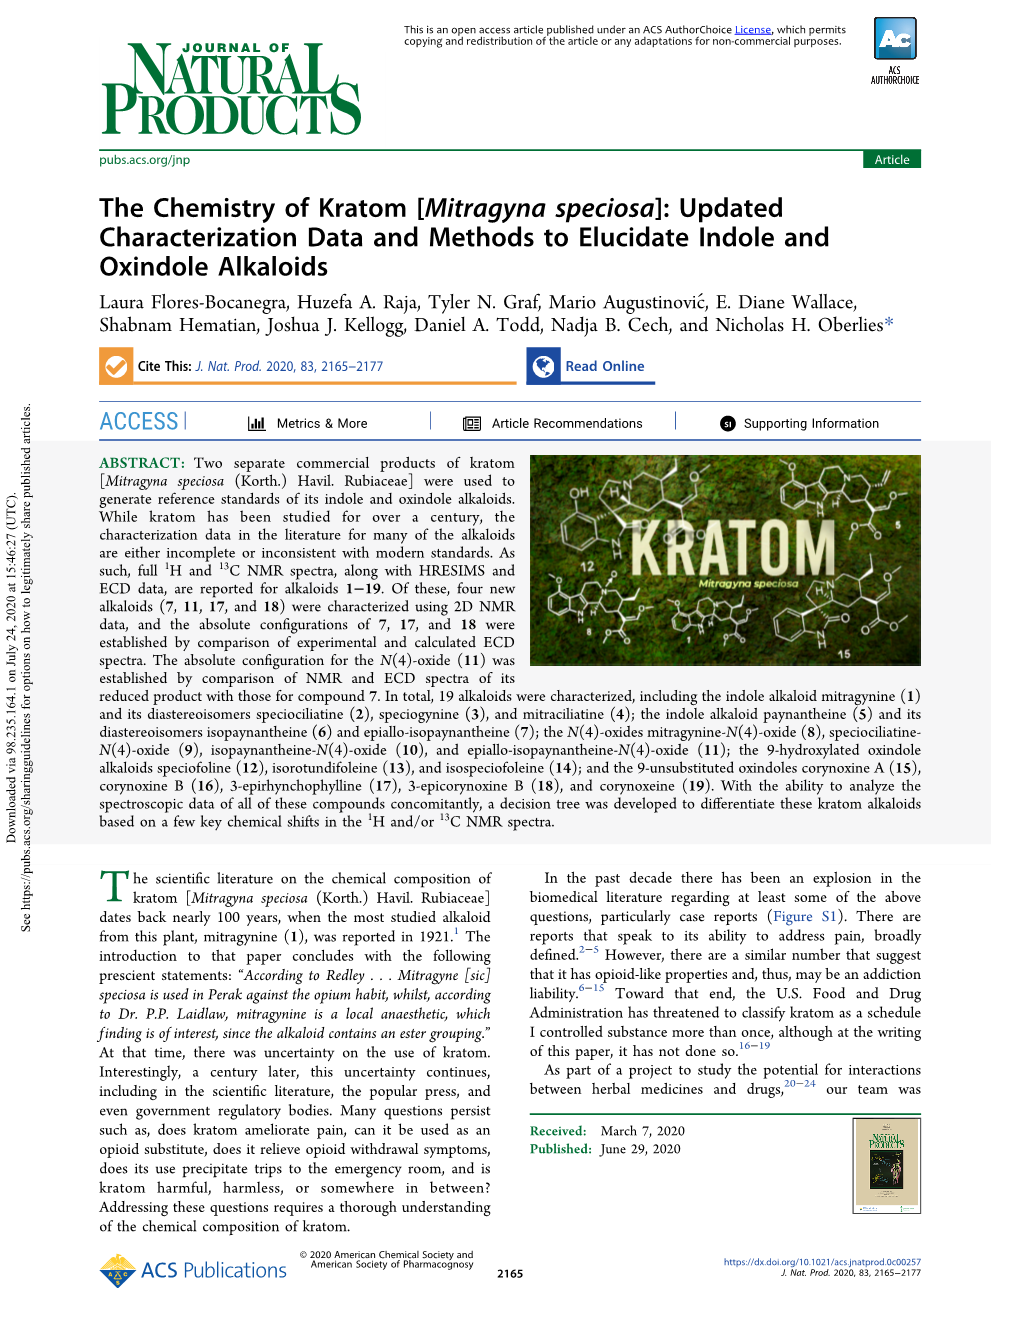 The Chemistry of Kratom [Mitragyna Speciosa]: Updated Characterization Data and Methods to Elucidate Indole and Oxindole Alkaloids Laura Flores-Bocanegra, Huzefa A